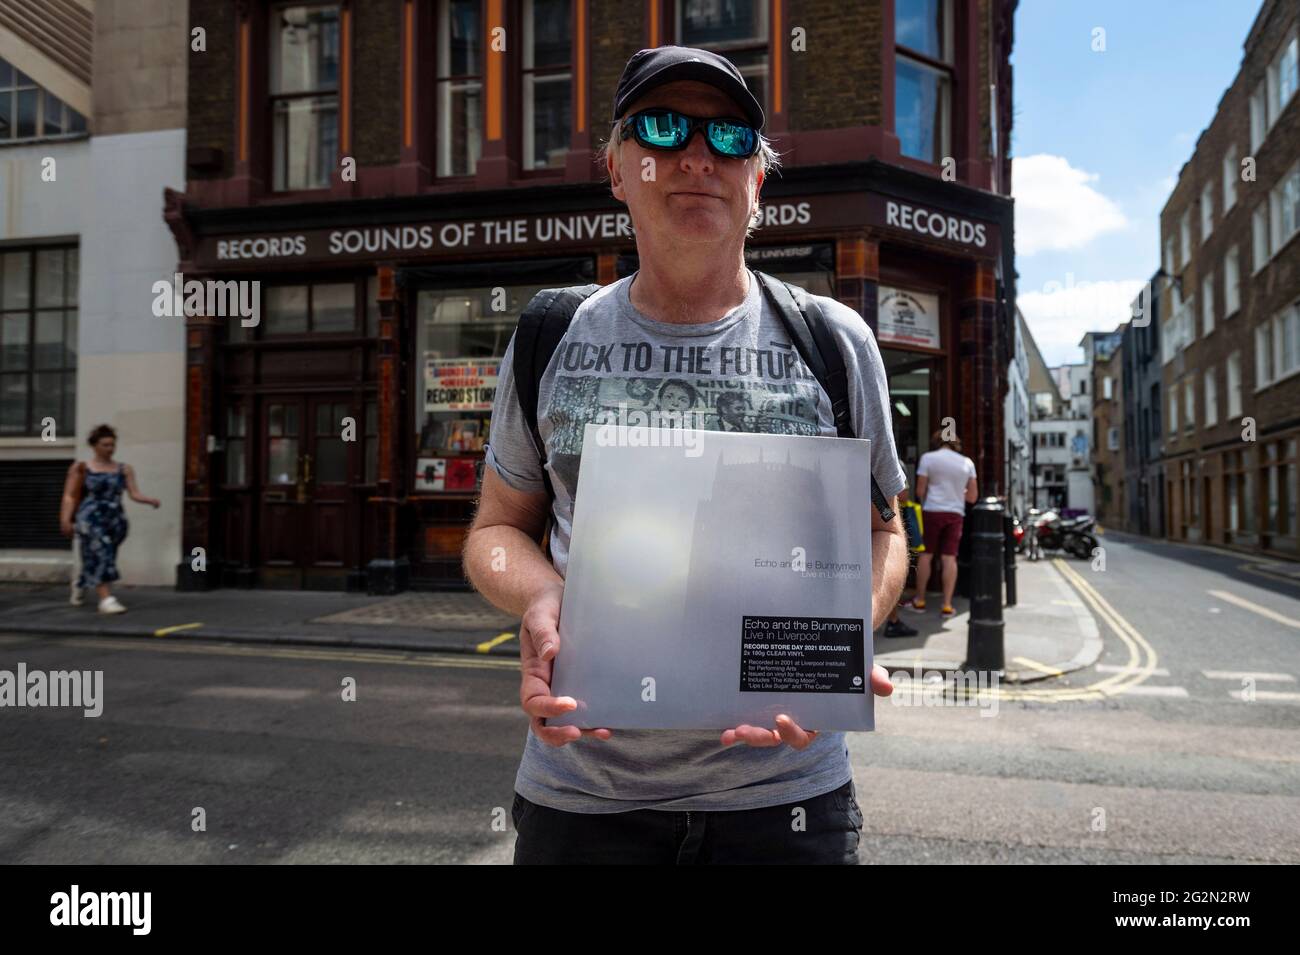 London Uk 12 June 21 Marcelo A Tour Guide Of Iconic Music History Landmarks For Rockishere Com Shows Off His Purchase Outside Sounds Of The Universe Records In Soho On Record Store Day